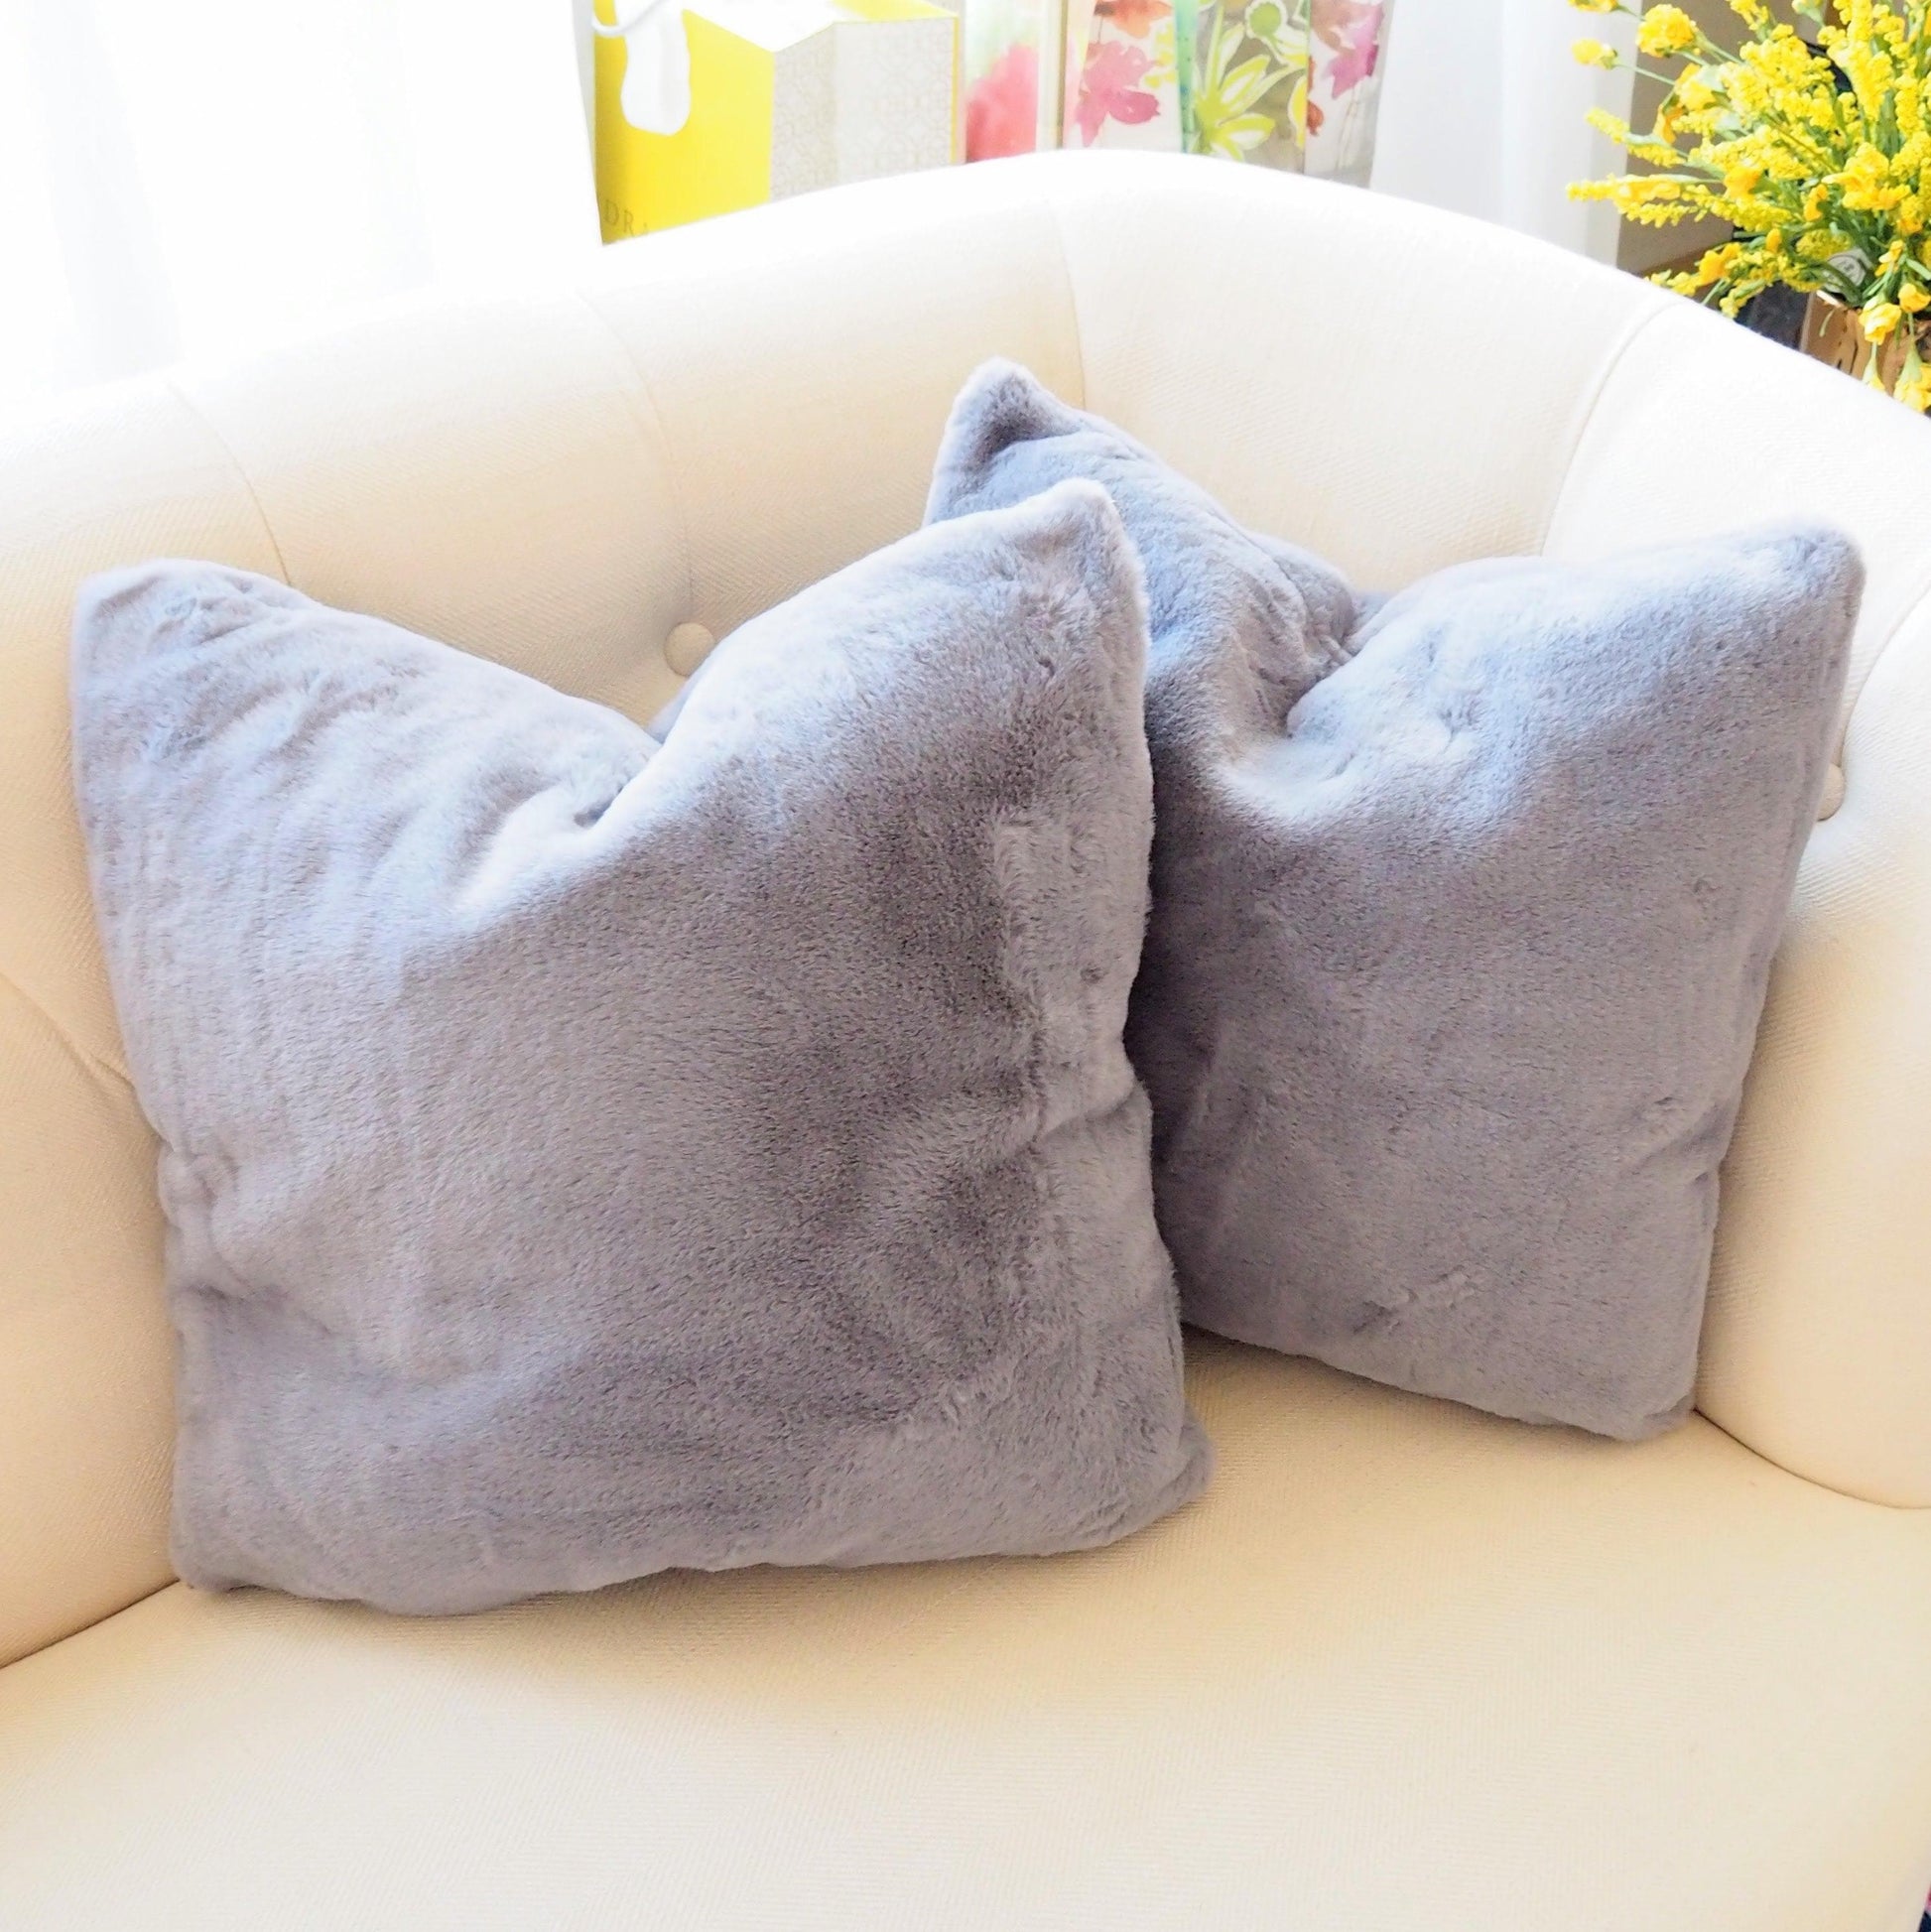 Faux Fur Throw Pillows with Adjustable Insert 18 x 18